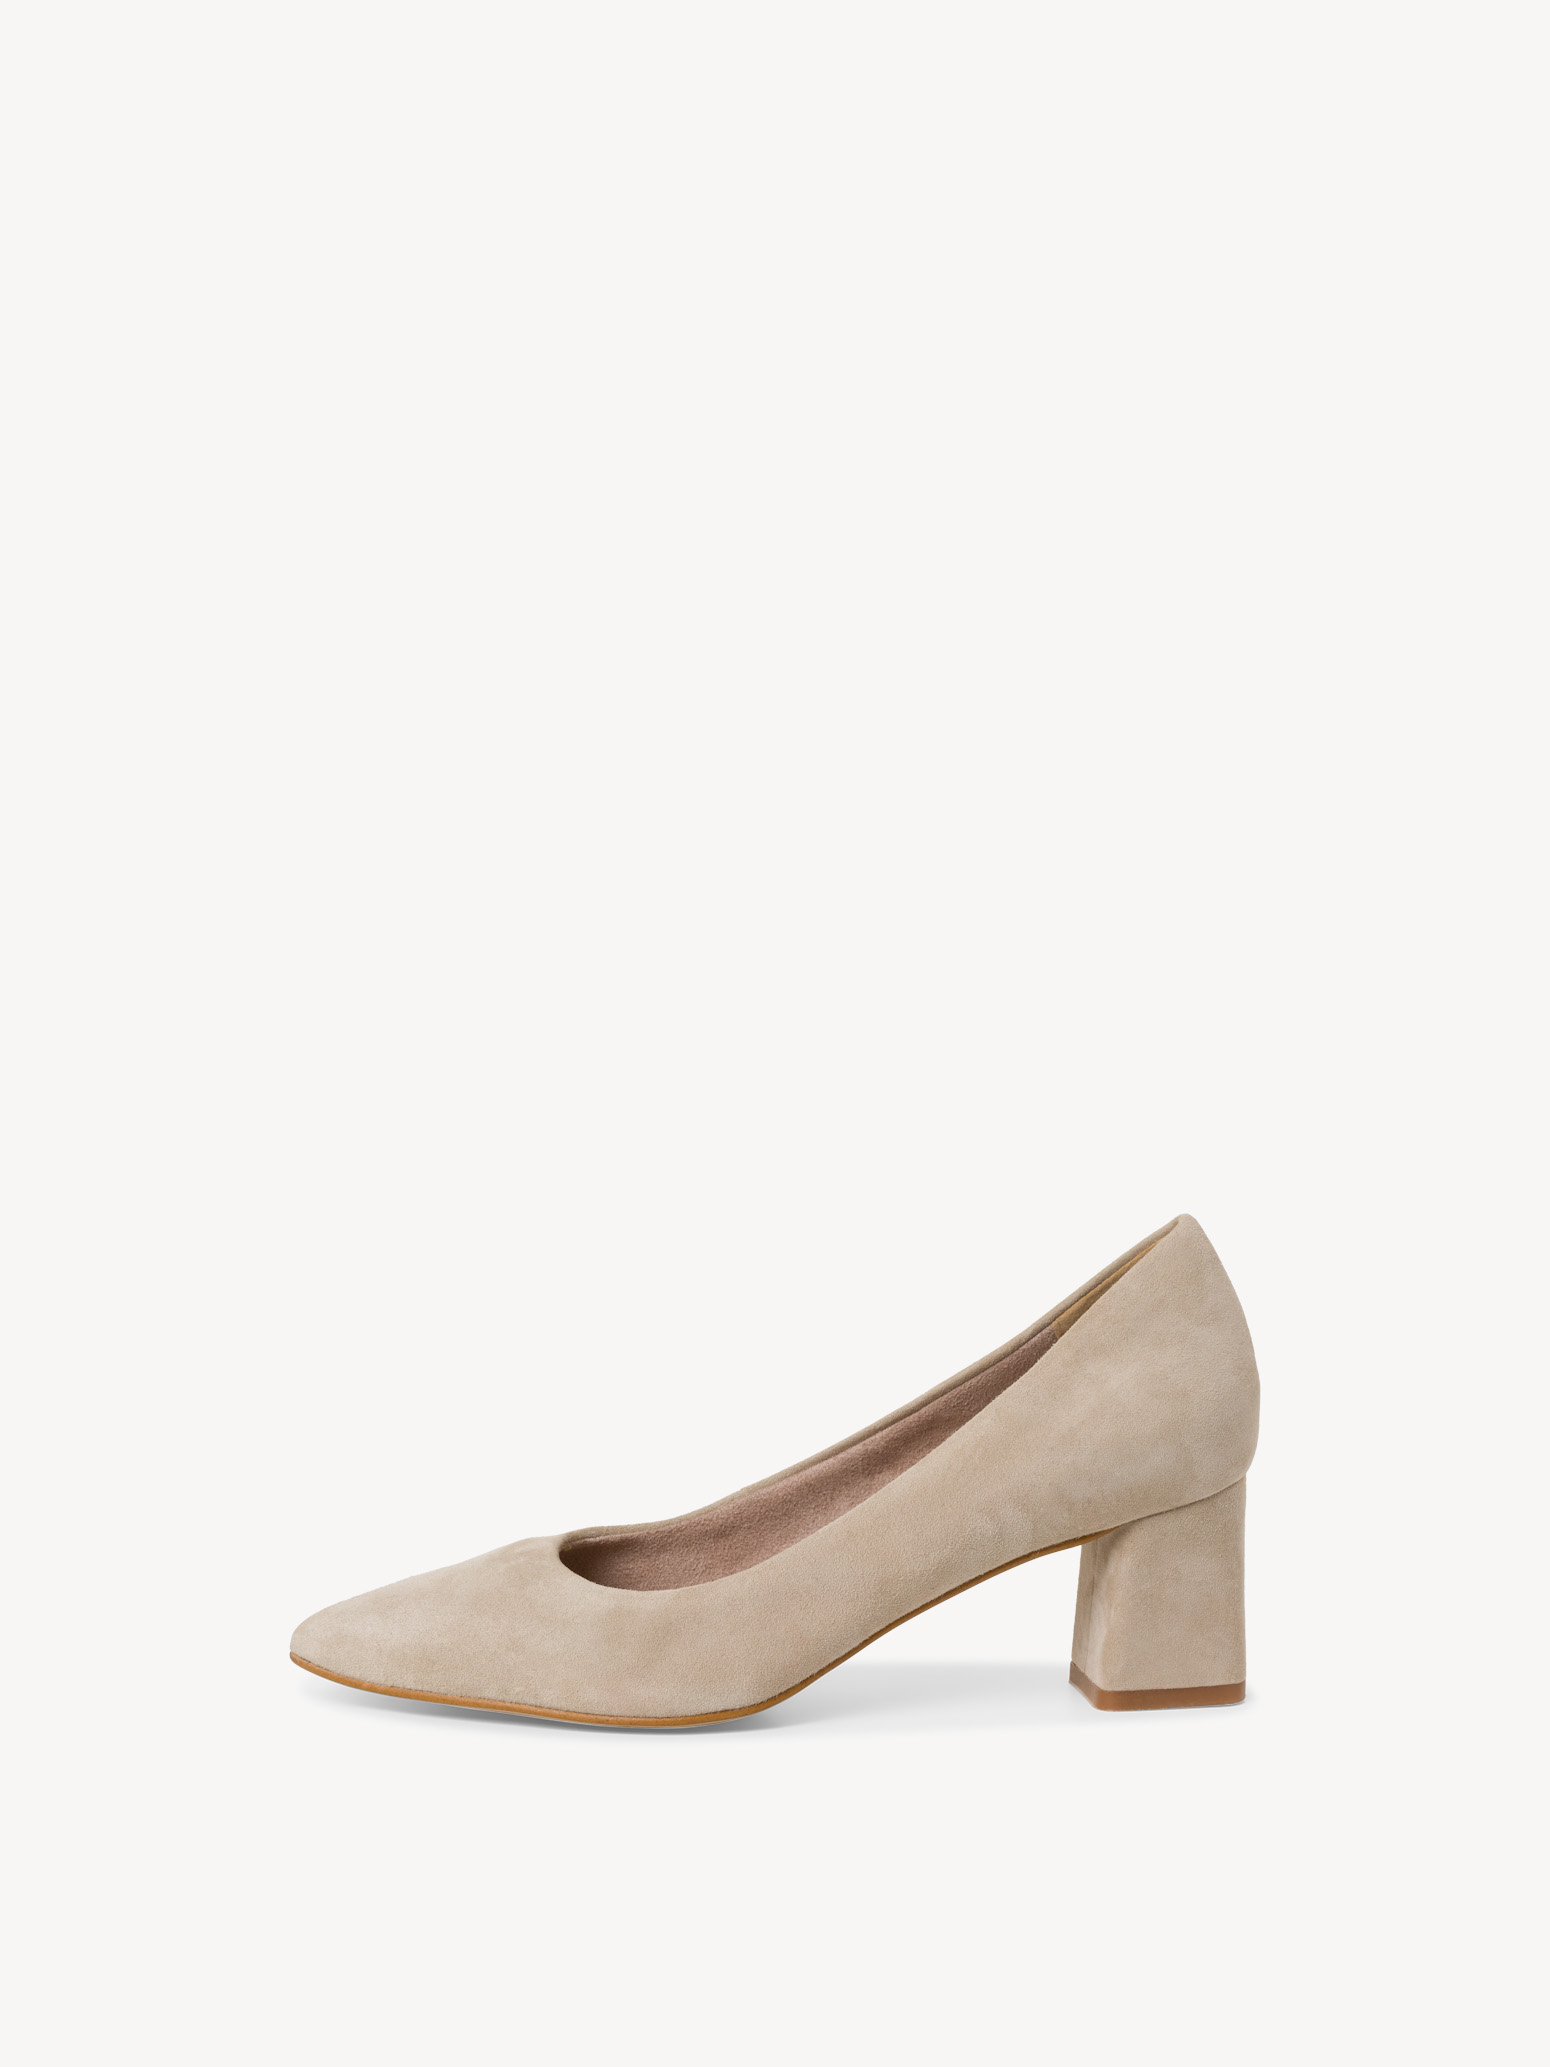 Leather Pumps - beige